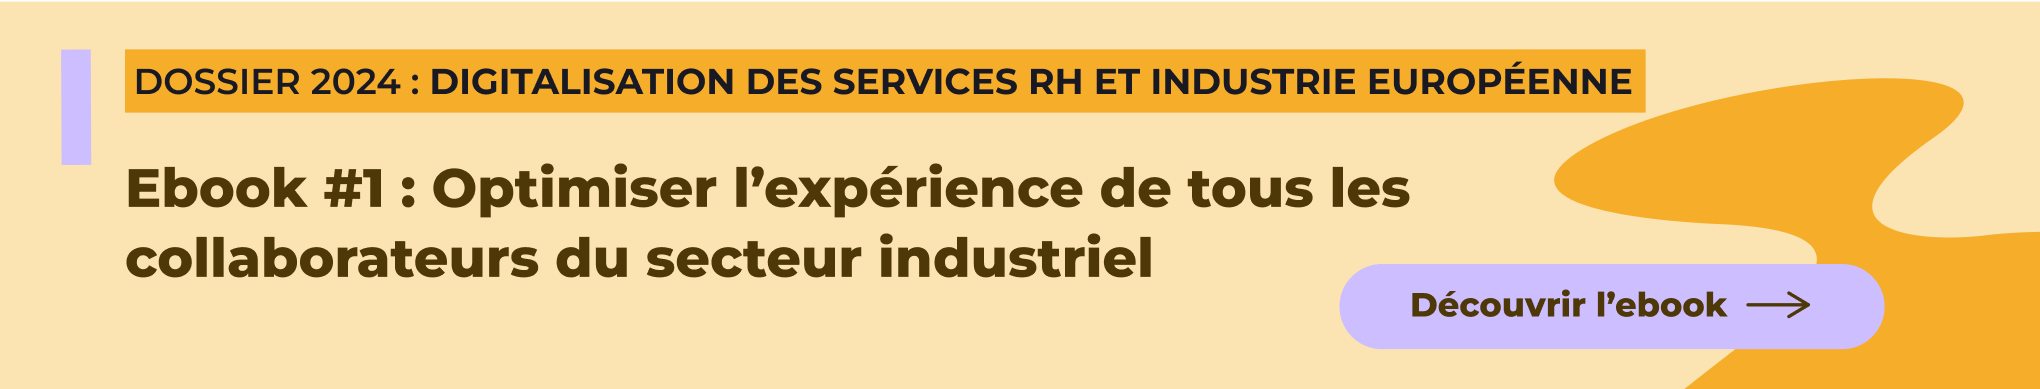 Footer-email-Dossier Manufacturing- Ebook 1 - optimiser lexperience collaborateur